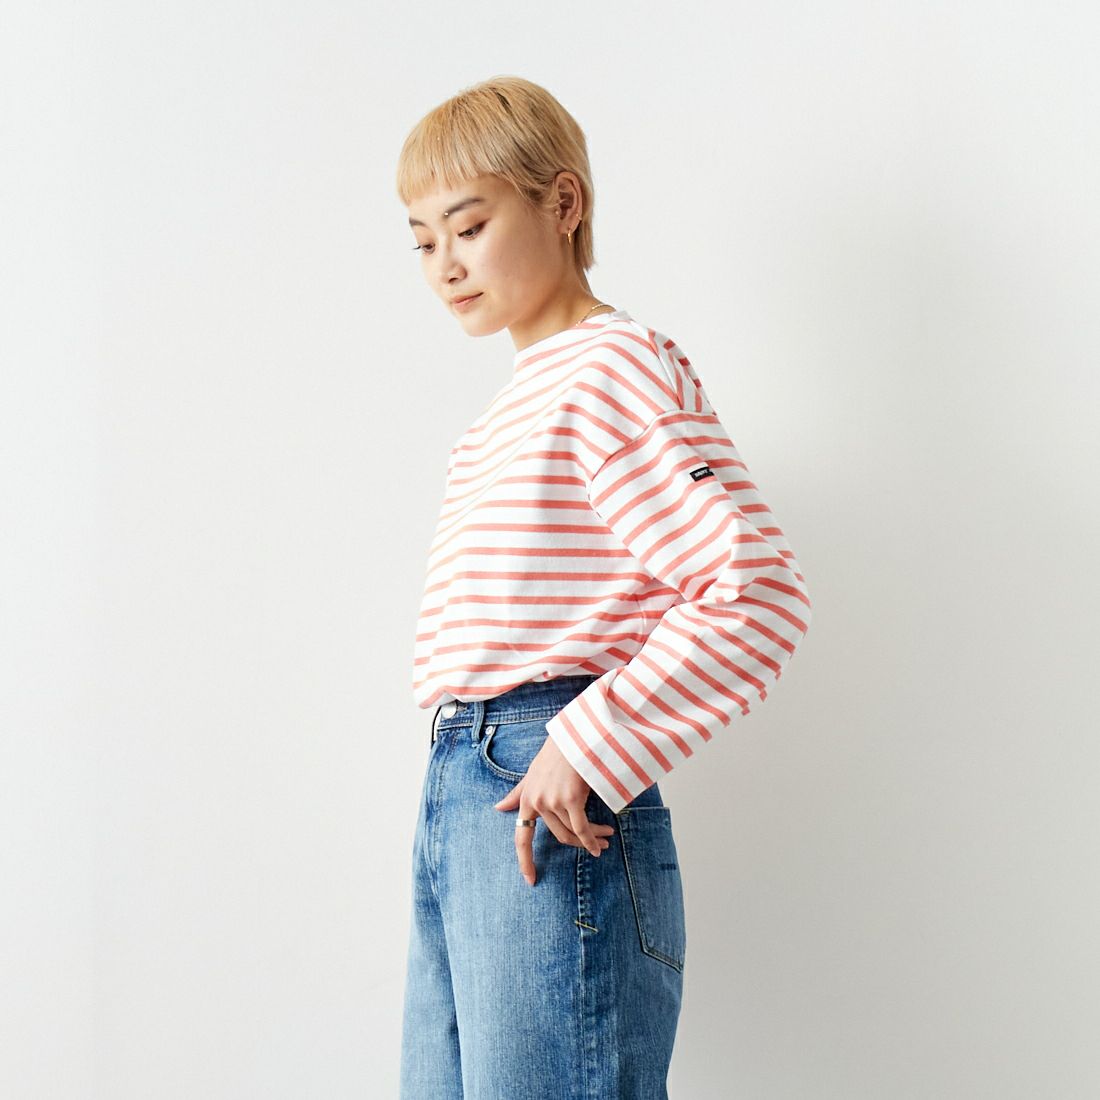 ST.JAMES [セントジェームス] 厚手ルーズドロップTシャツ [20JC-OUESS-LOOSE] NEI/FRE &&モデル身長：160cm 着用サイズ：3&&